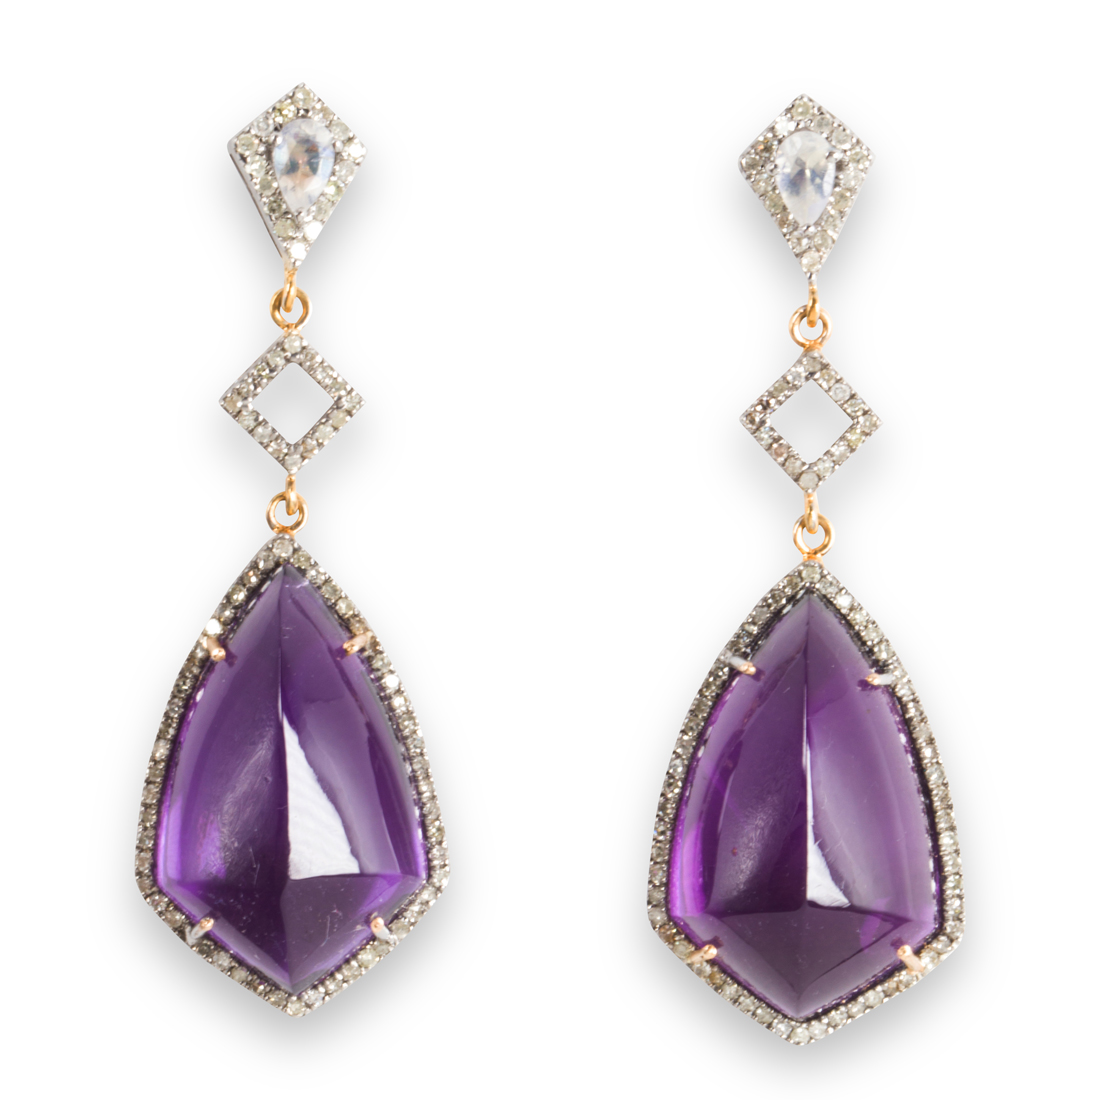 A PAIR OF AMETHYST, MOONSTONE AND